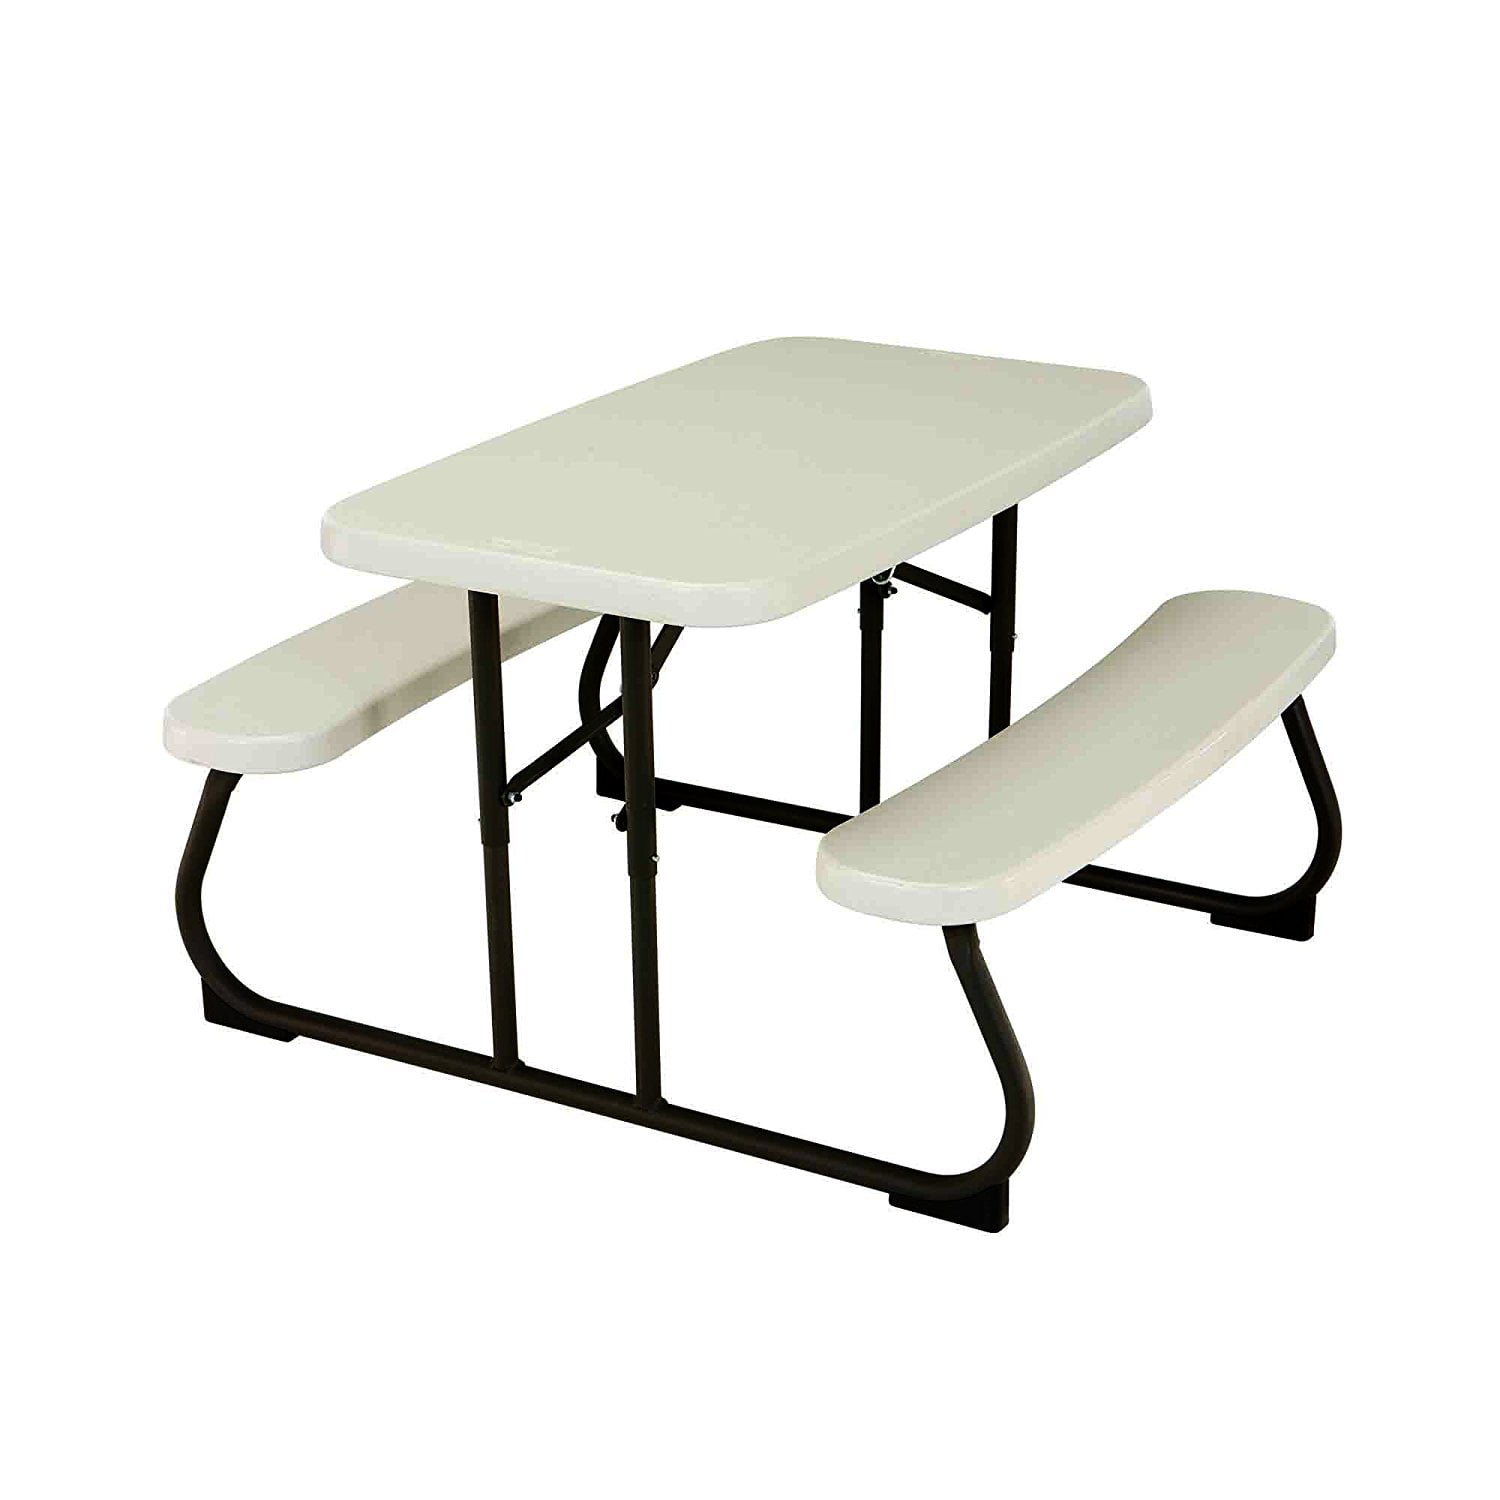 Lifetime 280094 Kid S Picnic Table, Folding Camping Table And Chairs Set Bunnings